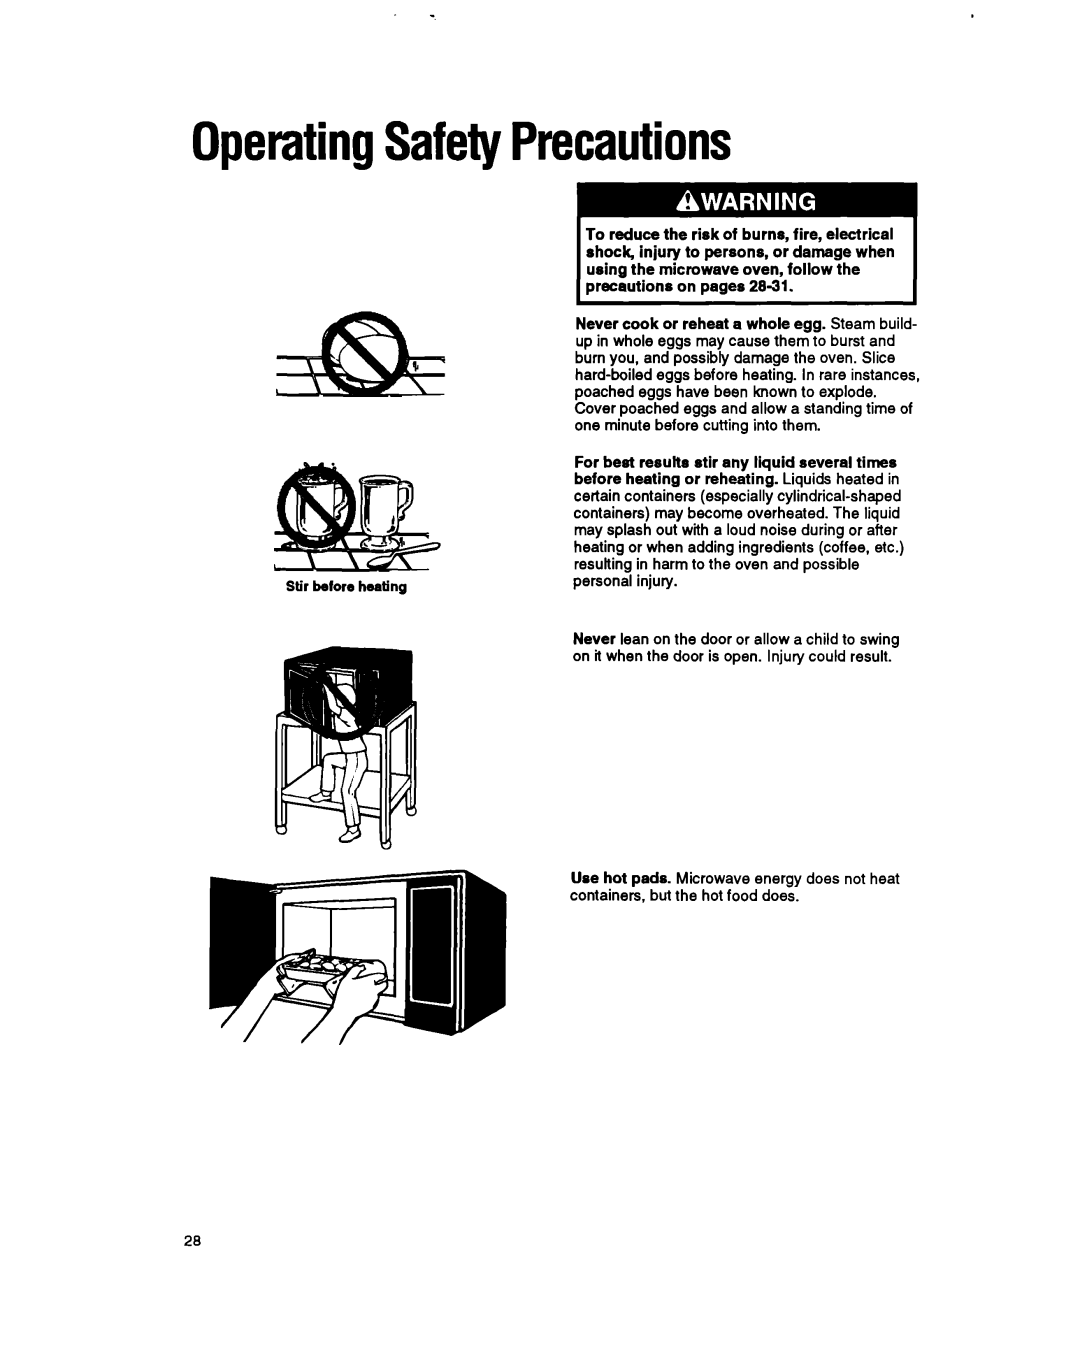 Whirlpool MT6901XW, MT6120XY, MT69OOXW manual OperatingSafetyPrecautions, using the microwave oven, follow the 